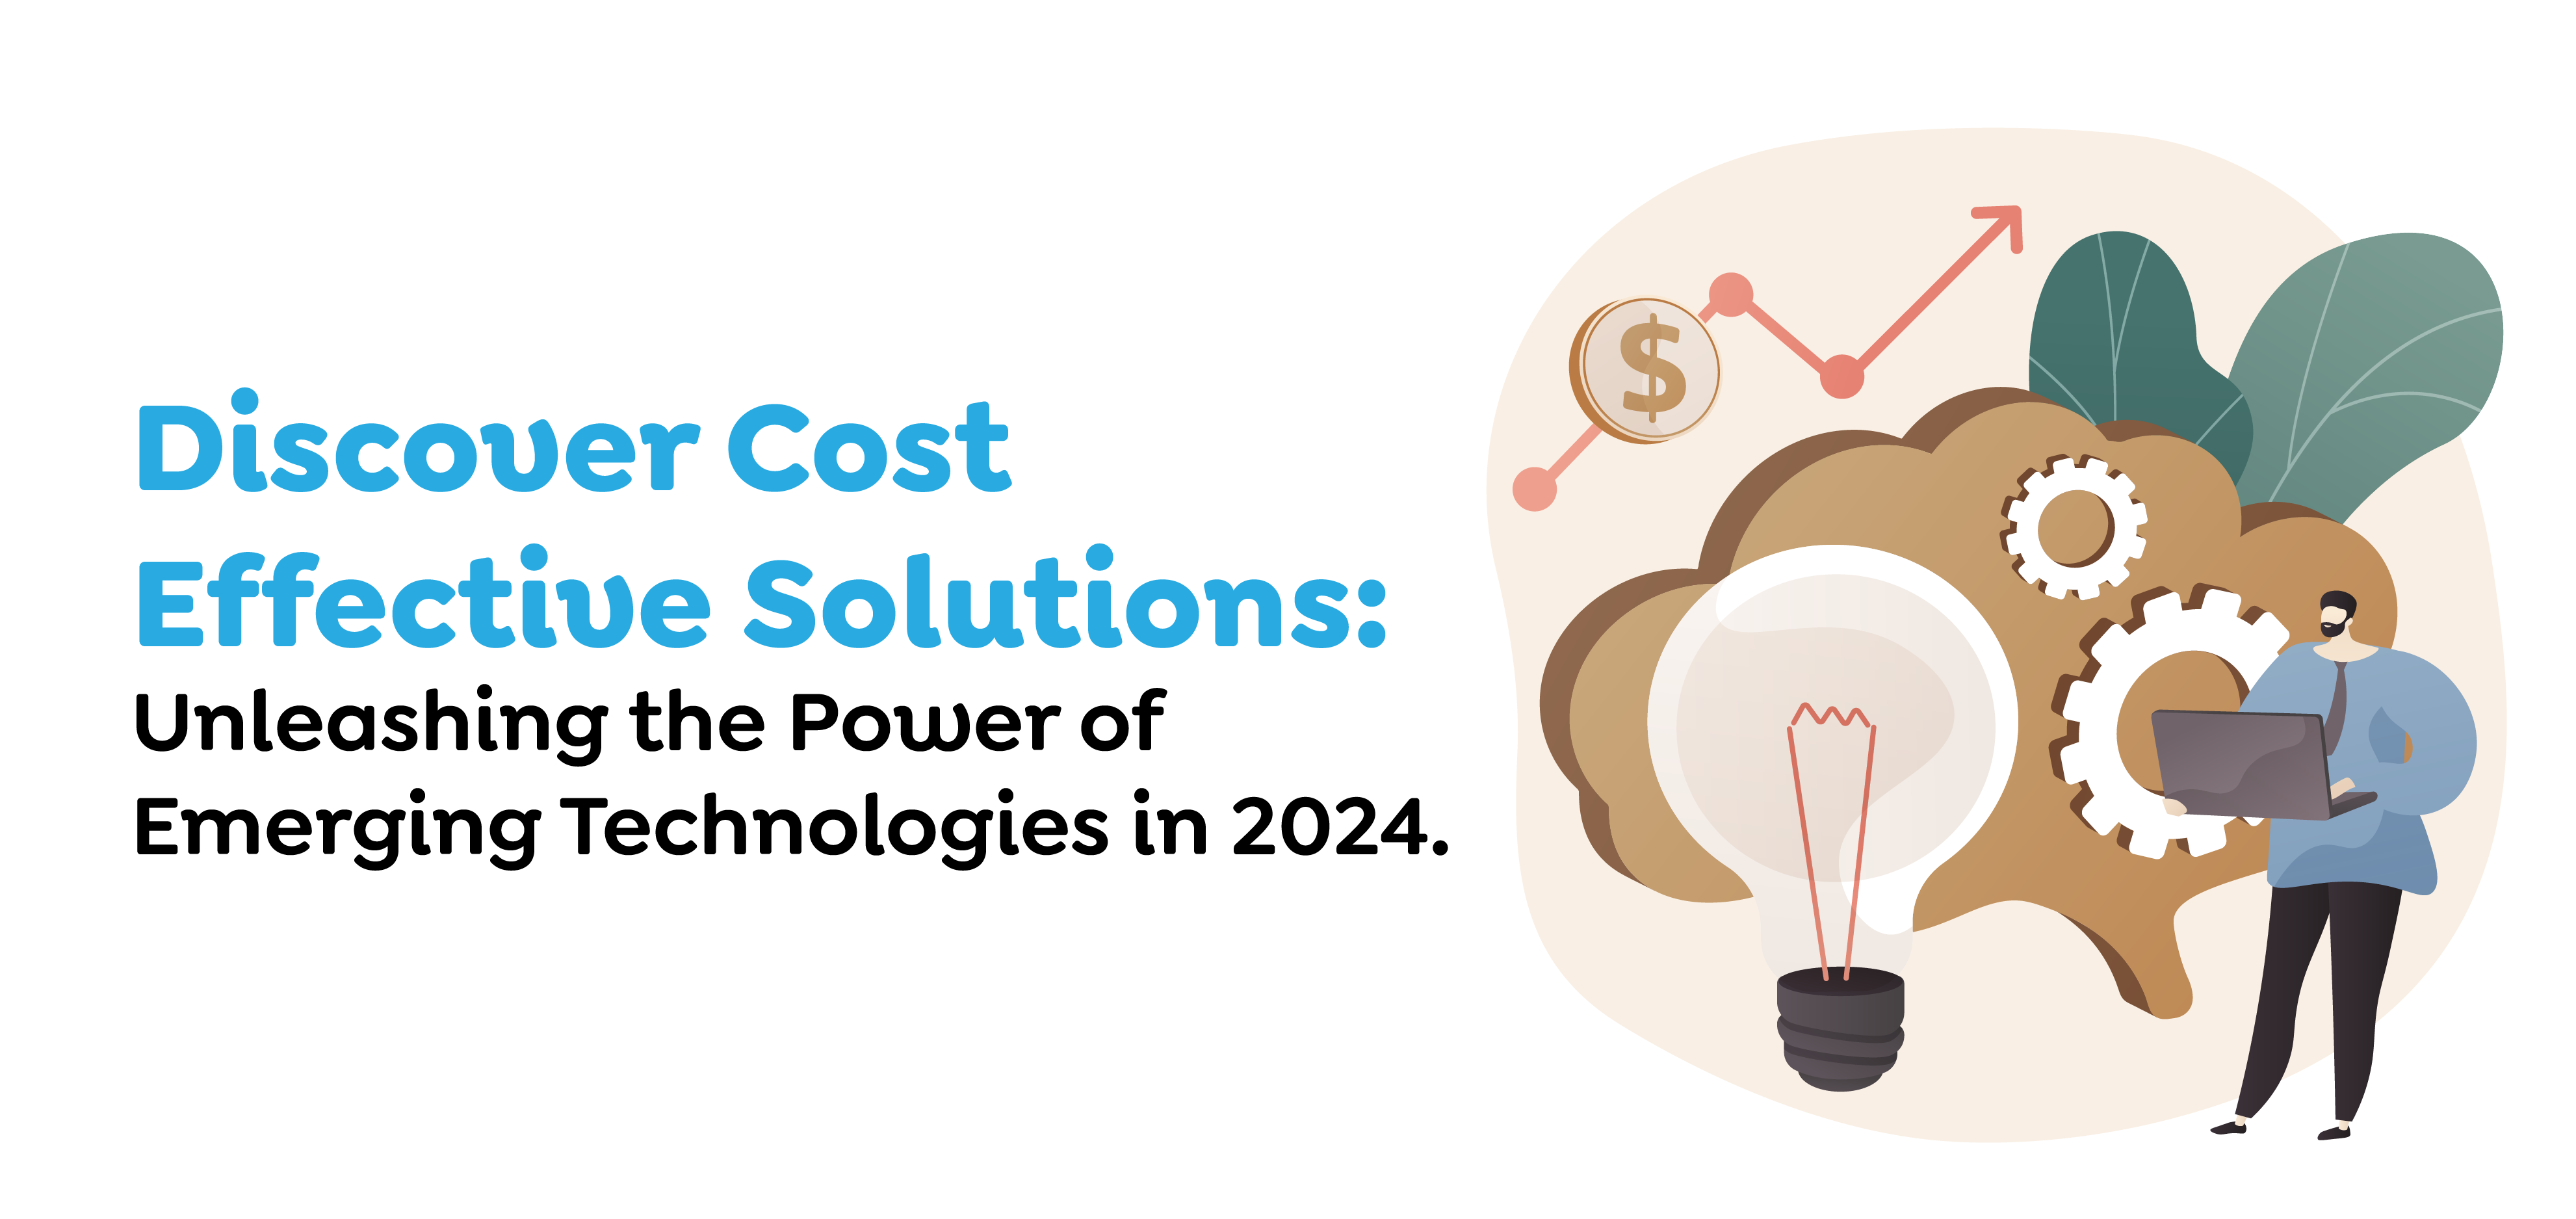 Discover Cost-Effective Solutions- Unleashing the Power of Emerging Technologies